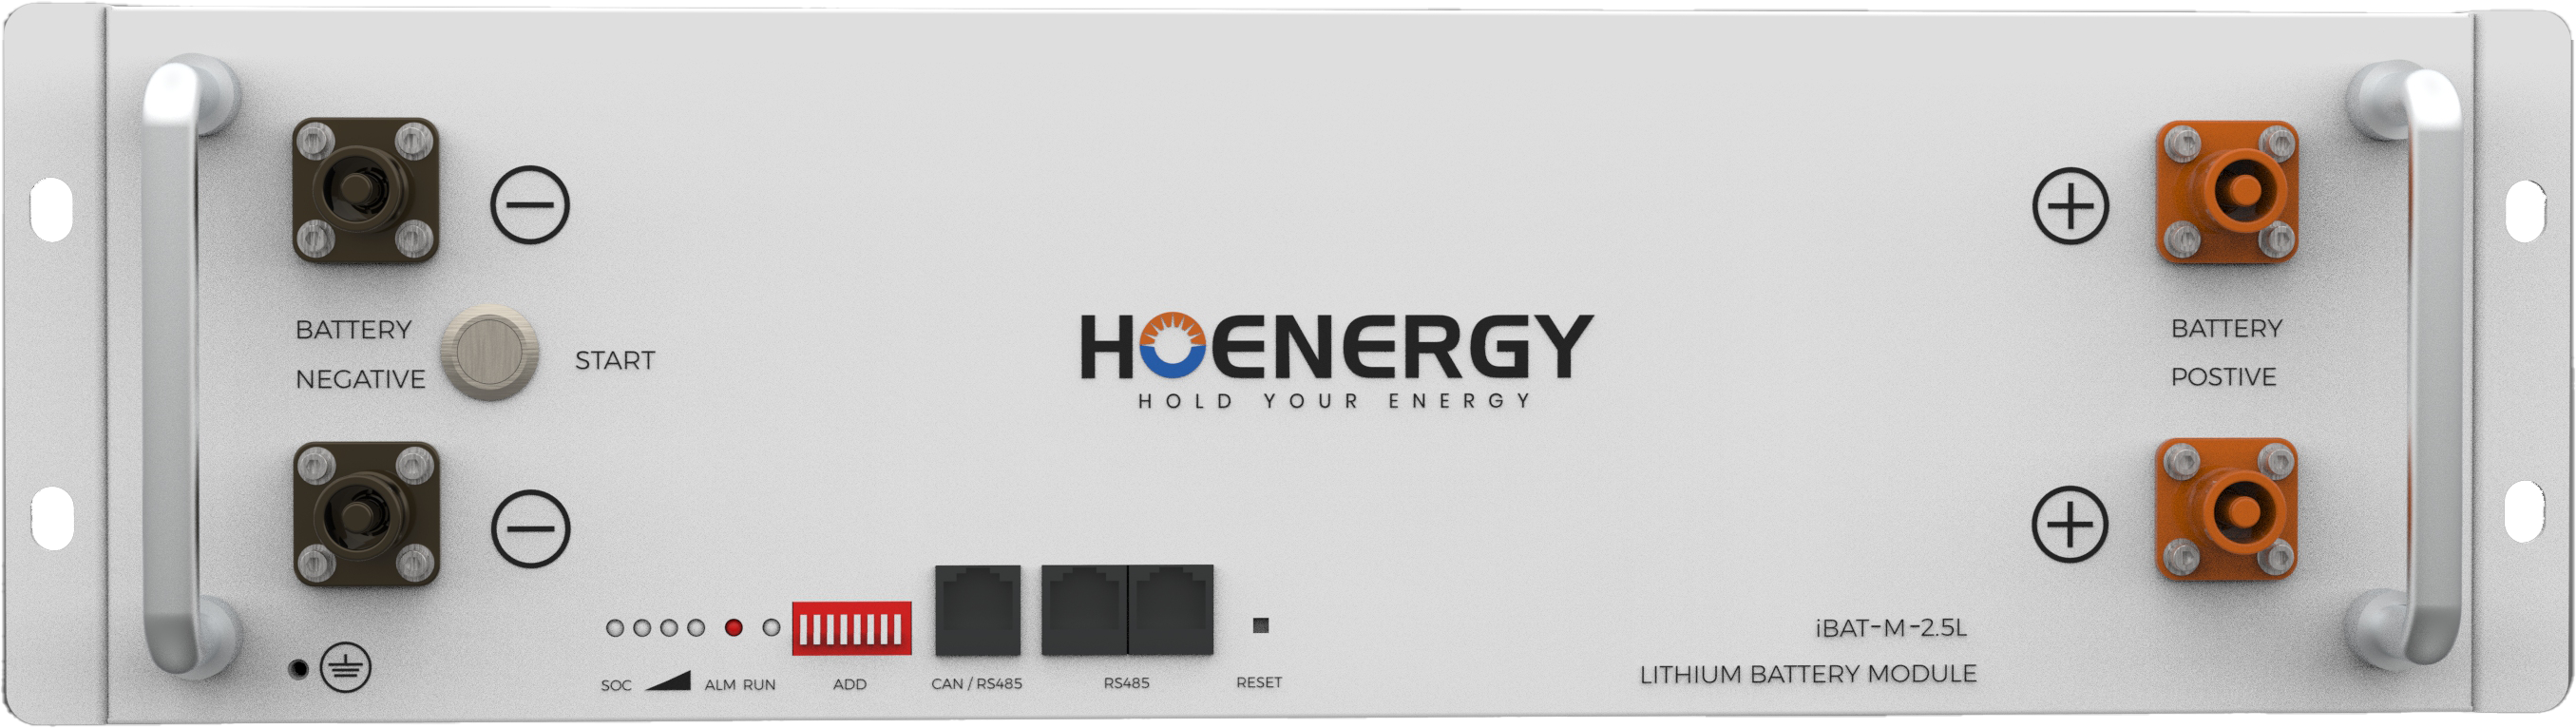 Hoenergy module design plug and play lithium-ion cell storage battery module 50 Ah adaptable with many inverters